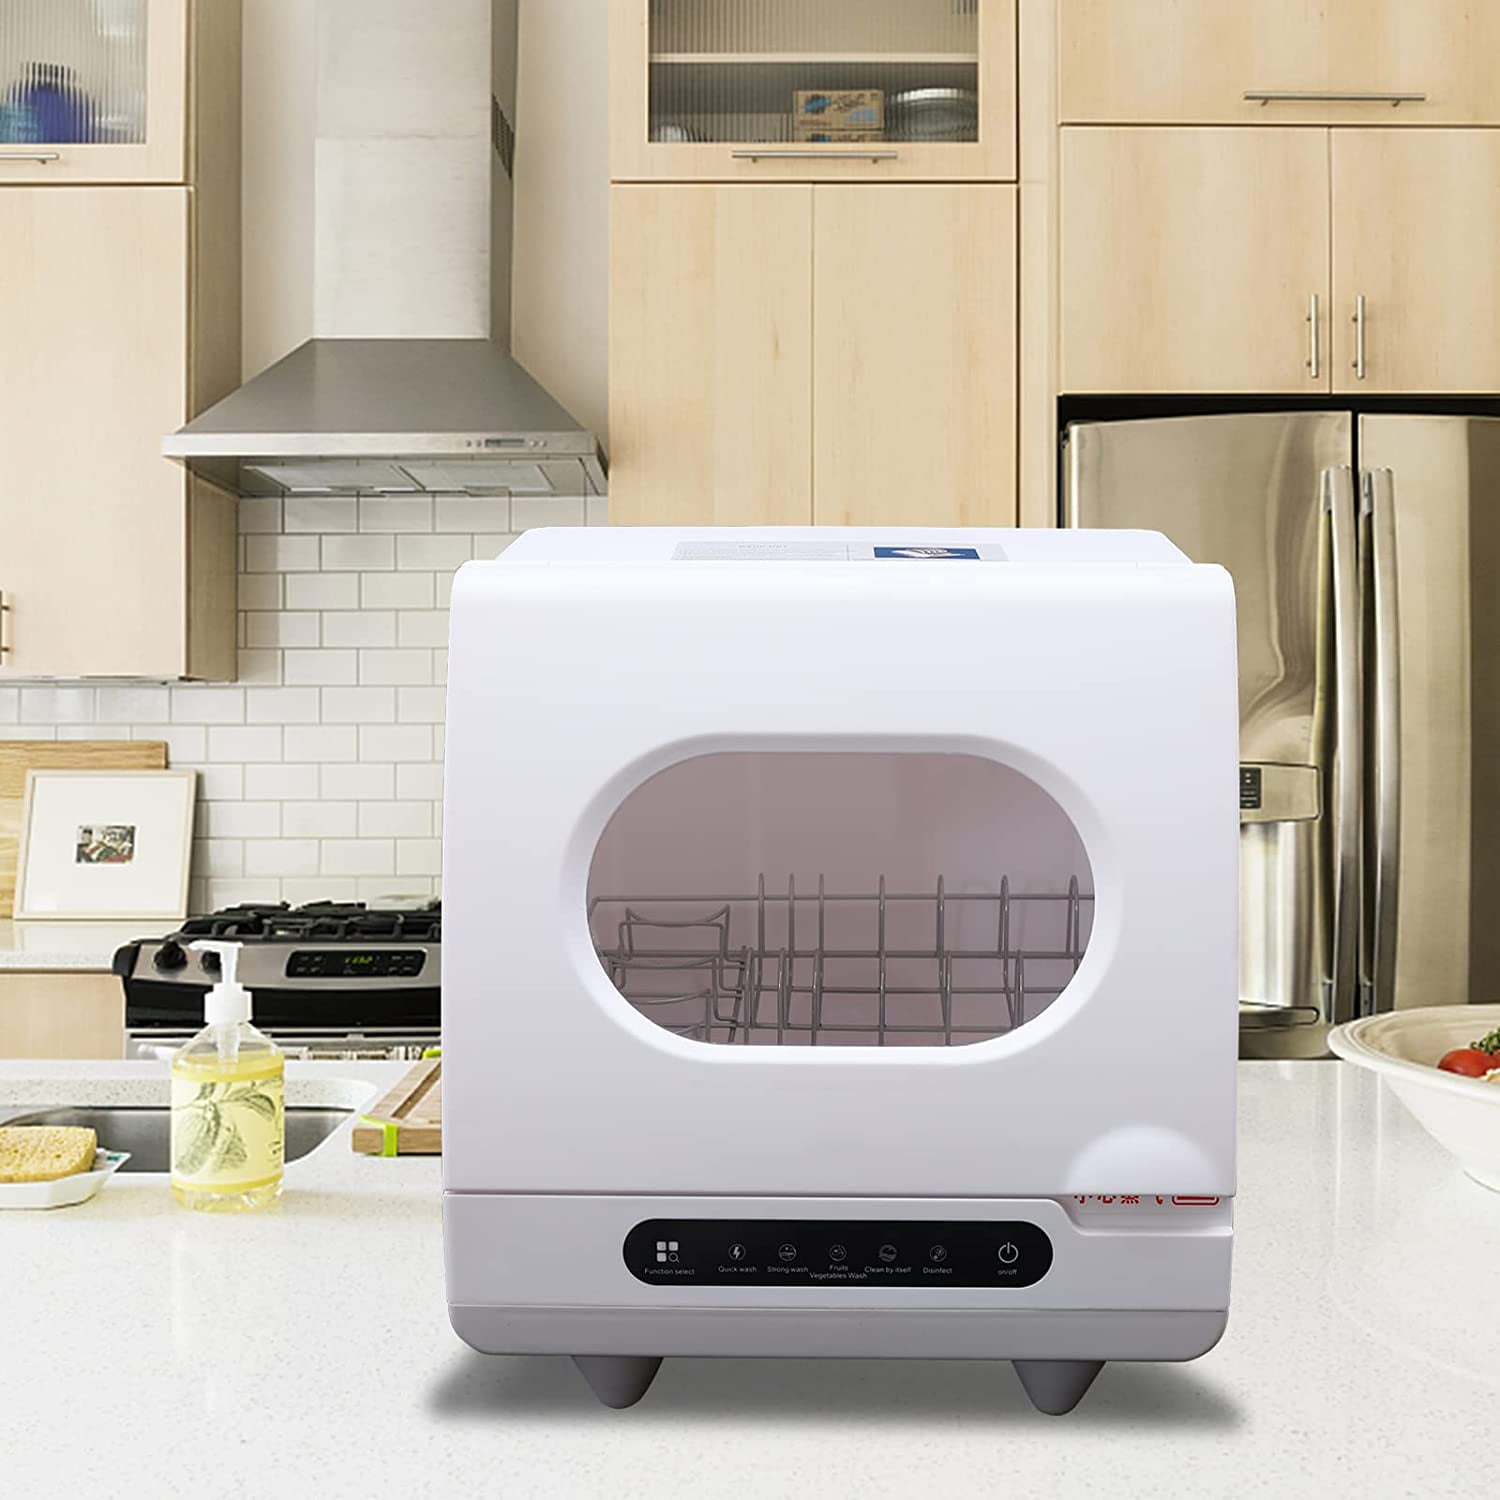  Mini Countertop Dishwasher with 5 Washing Programs, 1200w  Portable Dishwasher Countertop, Intelligent Compact Dishwasher for Home,  Apartment, Restaurant, Cafe, RV : Appliances